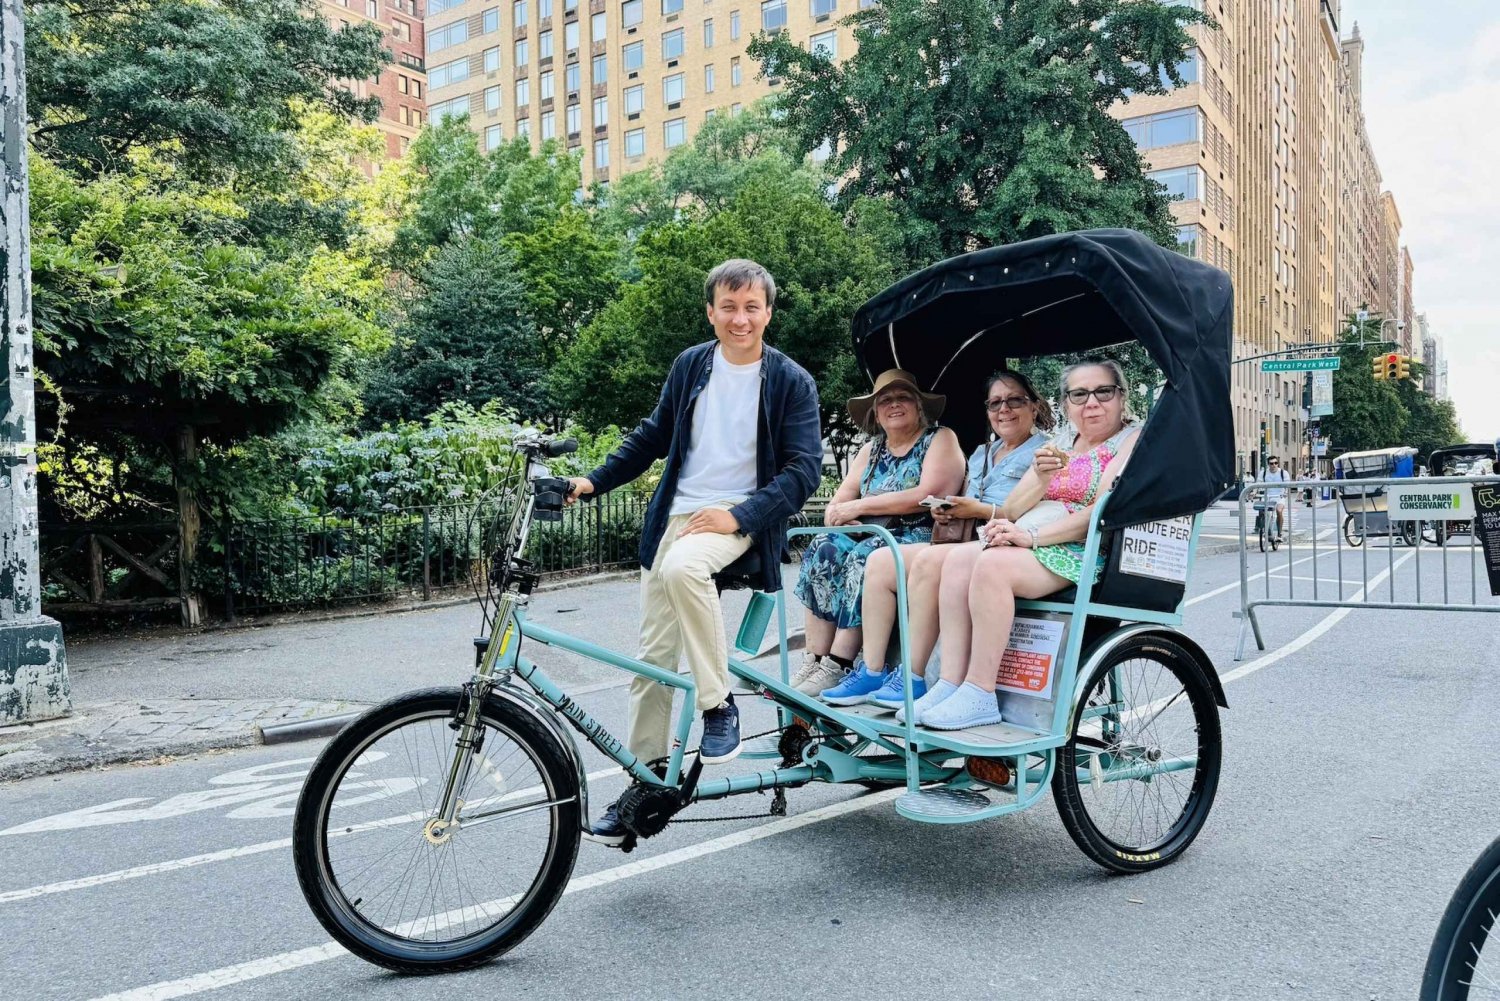 NYC: Guided Central Park Private Pedicab Tour (60 mins)